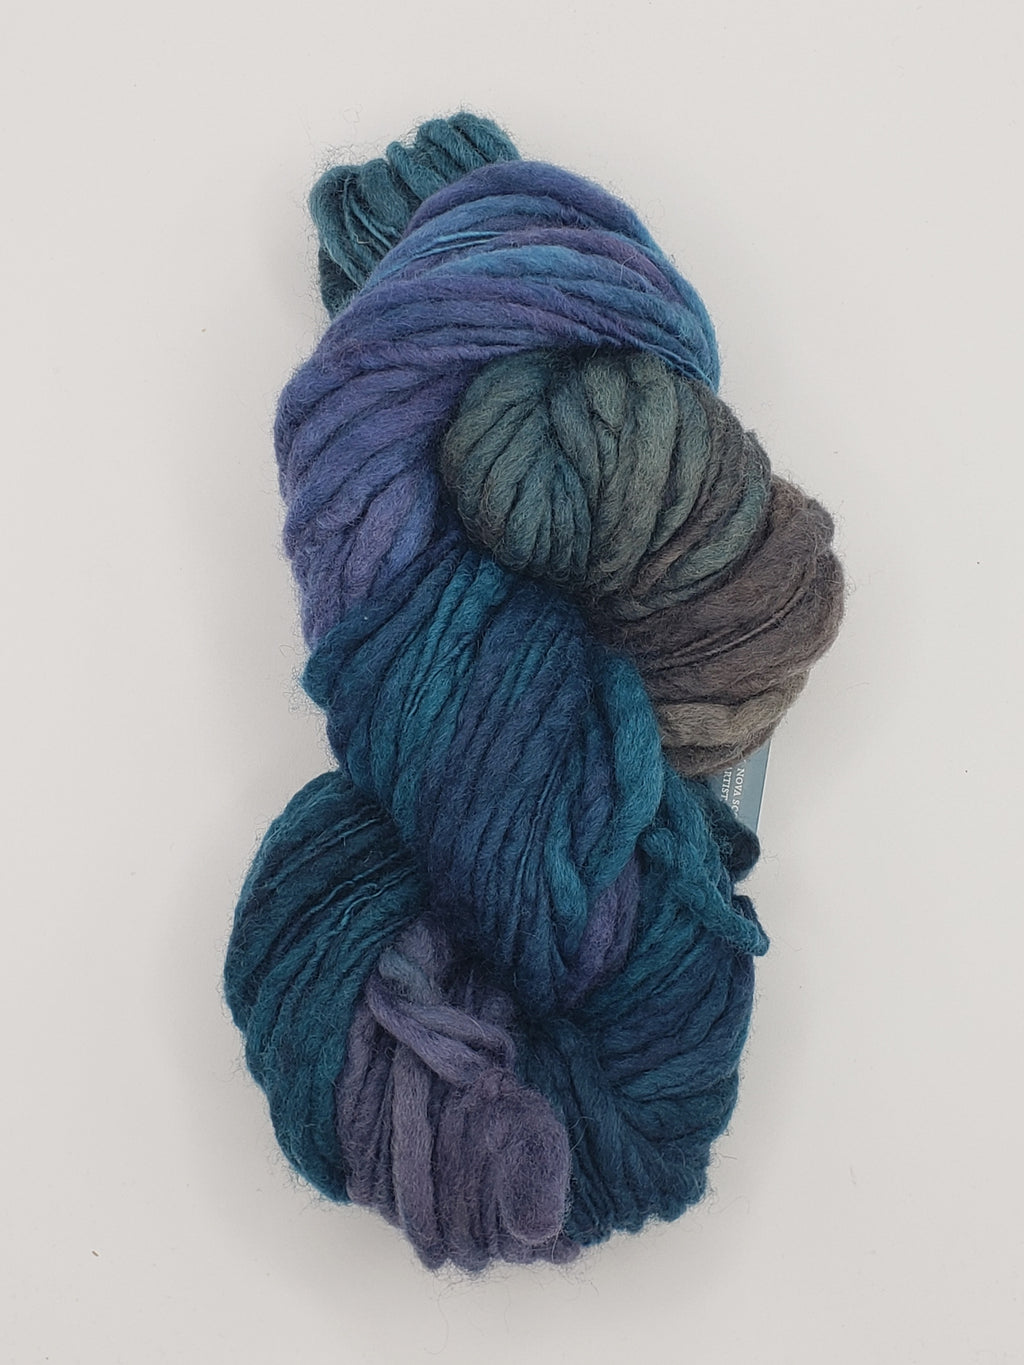 Slubby - CAPE BRETON HIGHLANDS -  National Park Collection - Merino/Blue Face Leicester - Hand Dyed Textured Yarn Thick and Thin